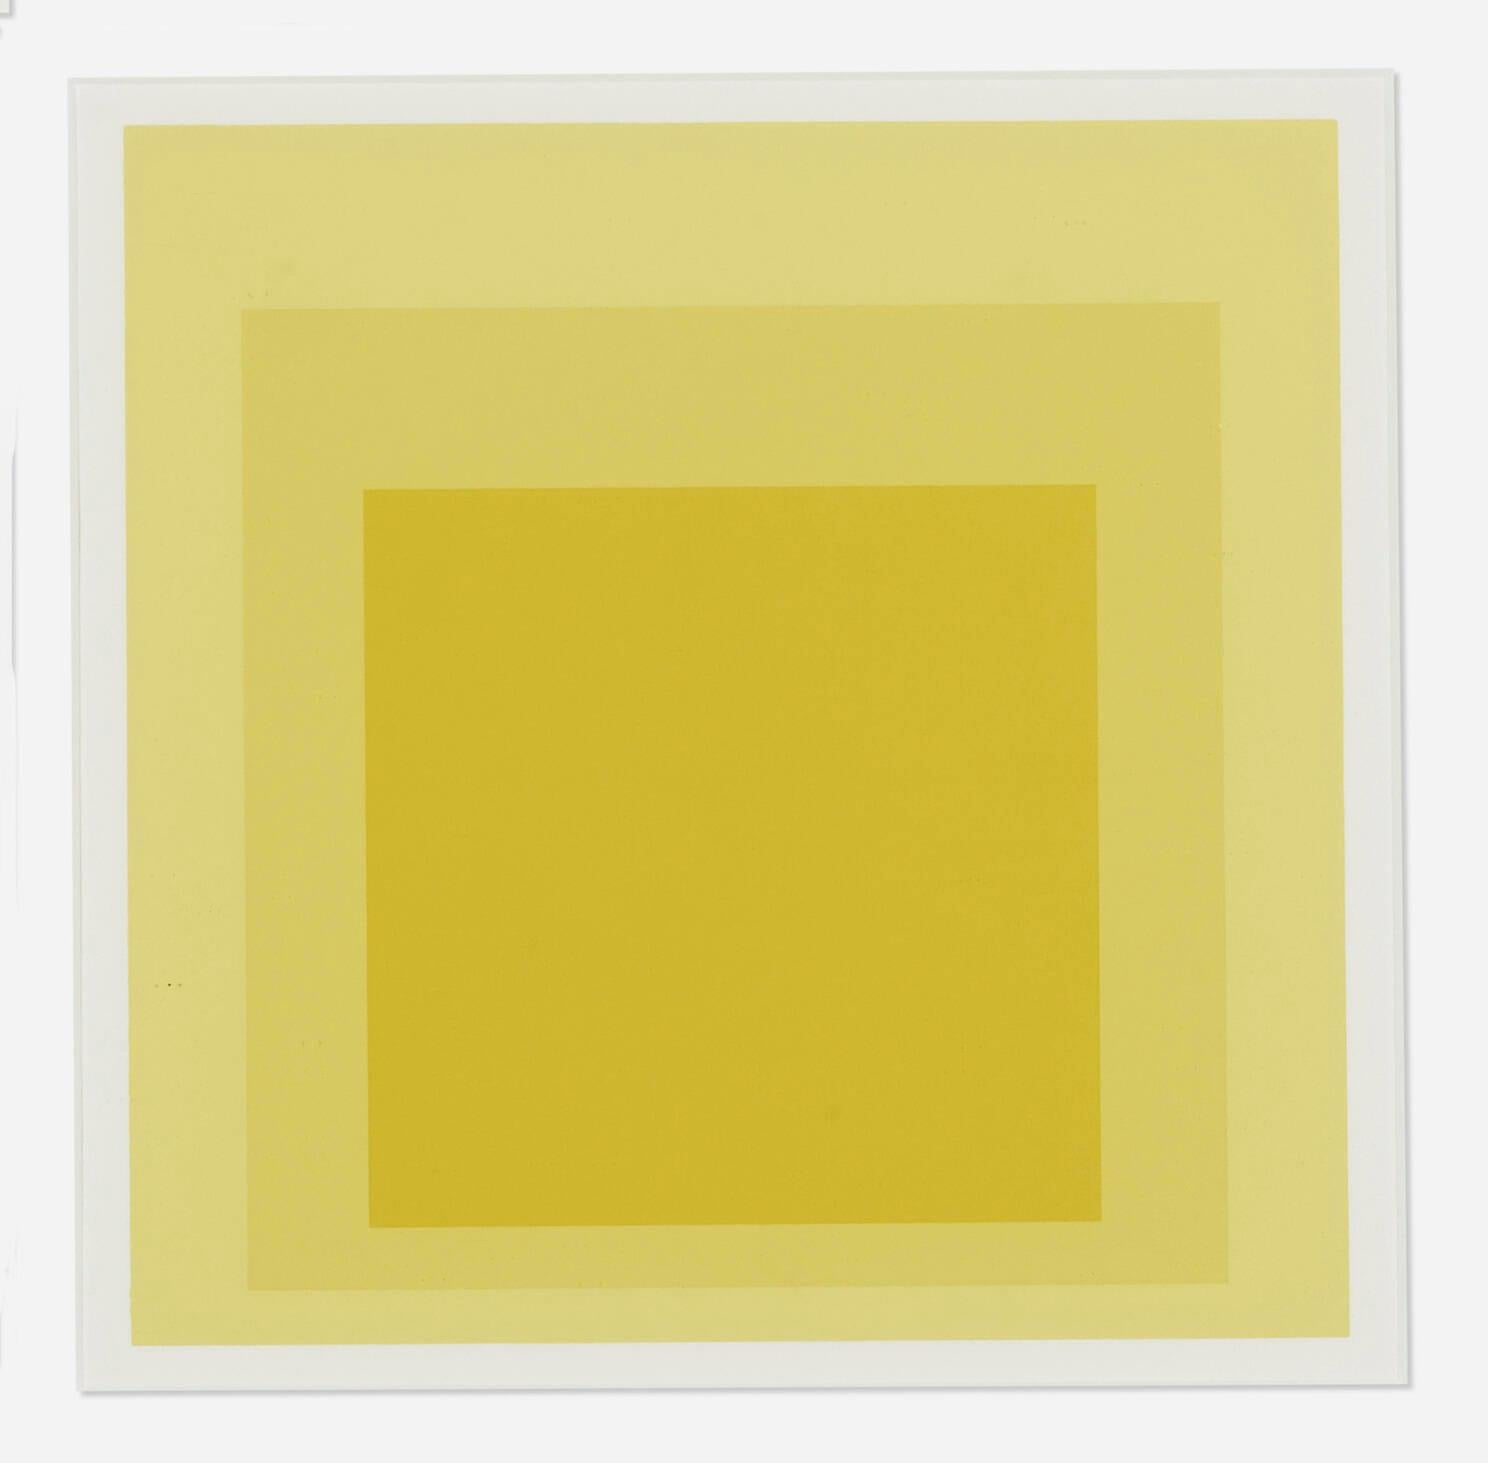 Josef Albers - Homage to the Square : Between the lines 1968, First edition